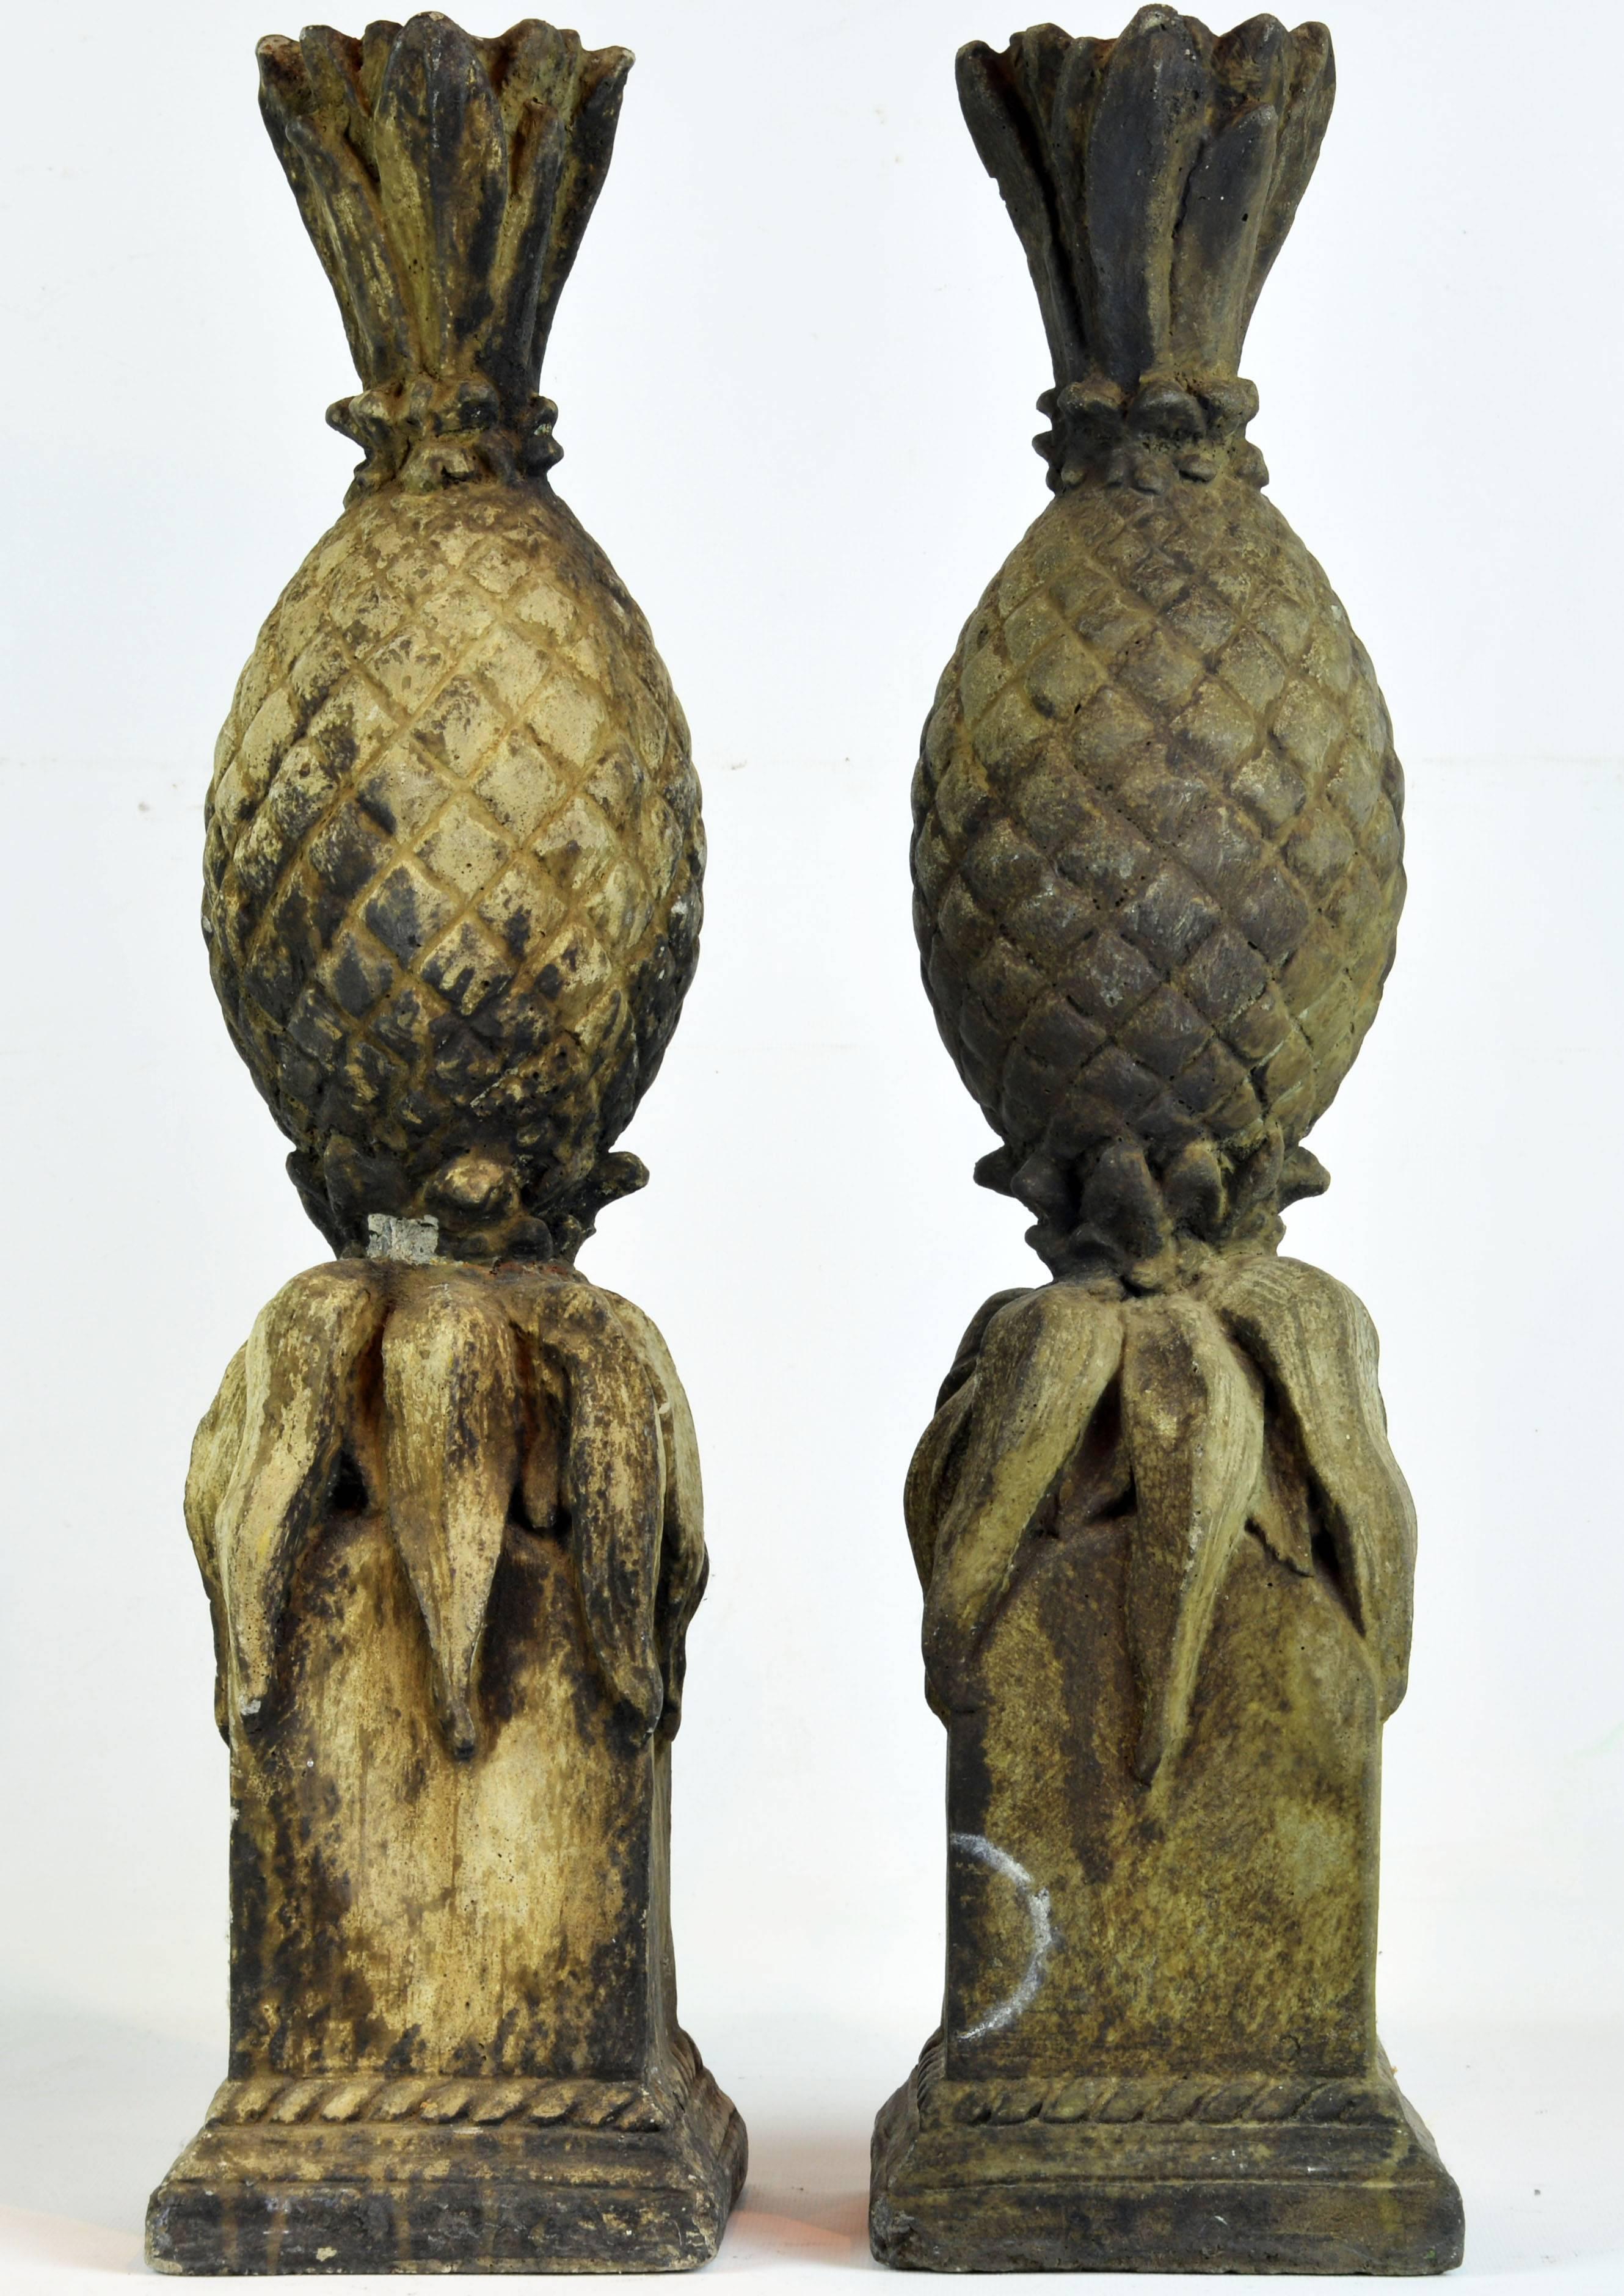 Standing 22 inches tall this attractive pair of antique cast stone statues of pineapples are raised on classical square stepped bases with rope friezes.